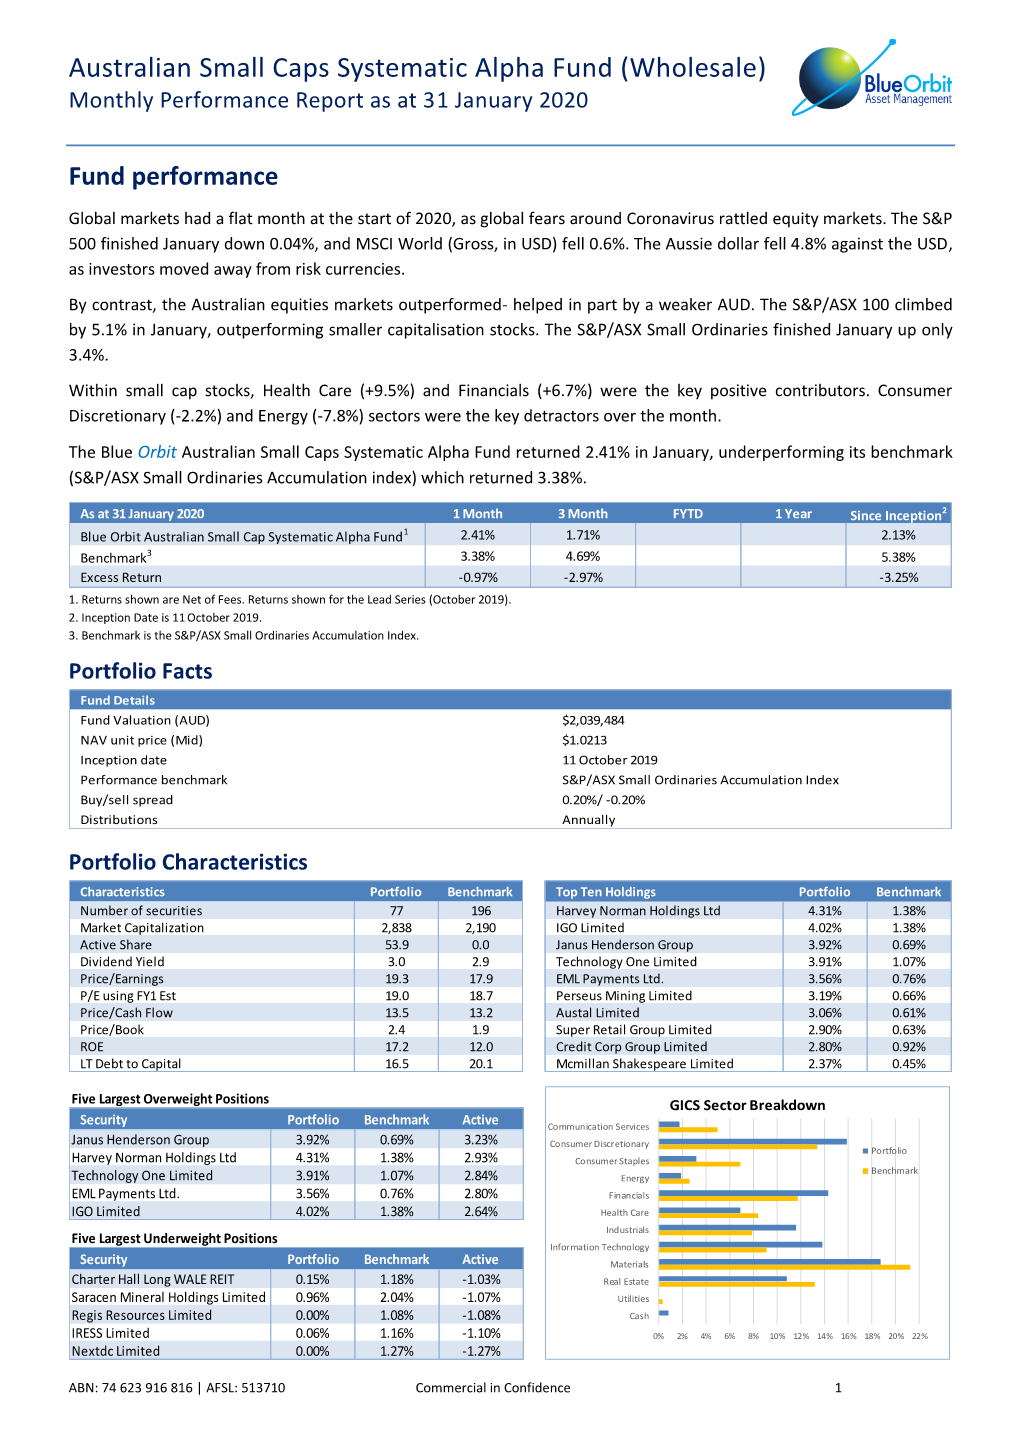 Australian Small Caps Systematic Alpha Fund (Wholesale) Monthly Performance Report As at 31 January 2020